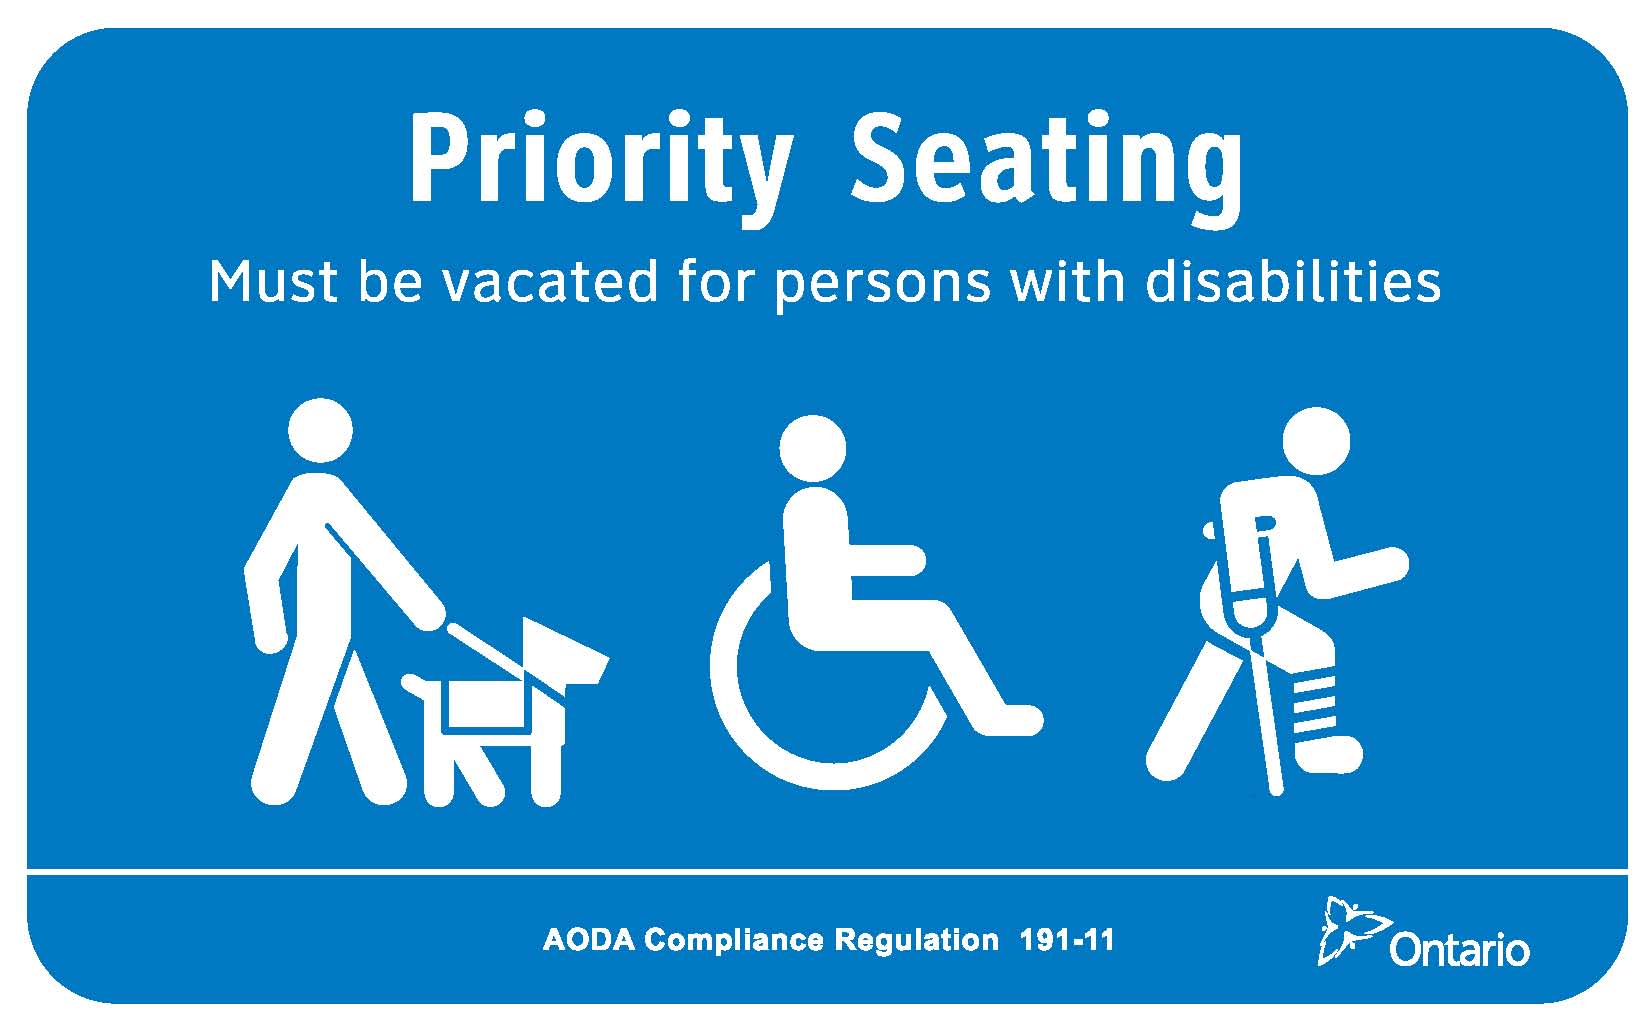 Graphic that shows icon of a service dog, wheelchair and crutches below the text "Priority Seating - Must be vacated for persons with disabilities"